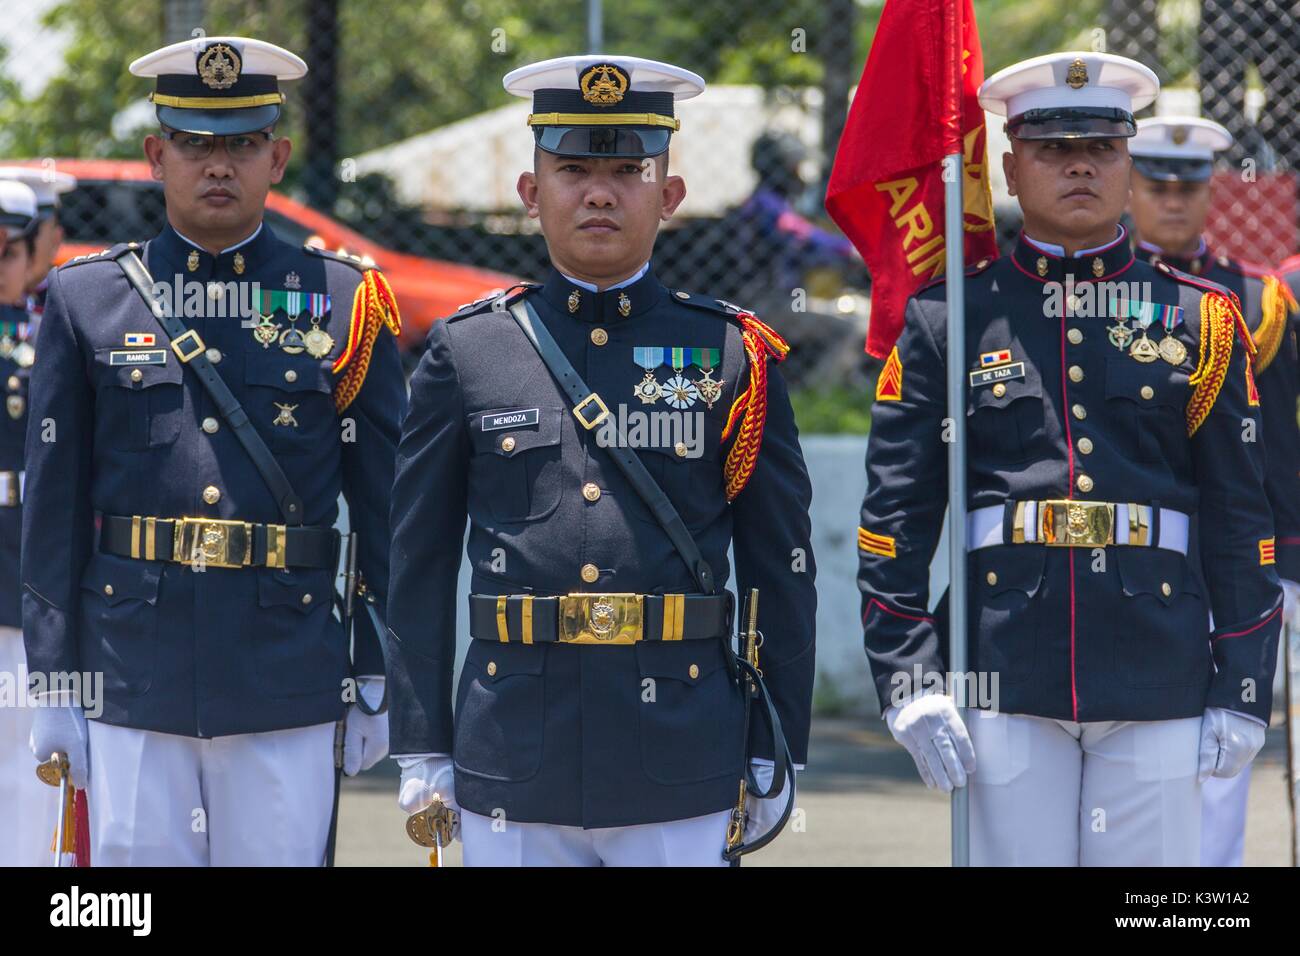 Philippine Marines Stand In Formation During A Honors Ceremony For K3W1A2 